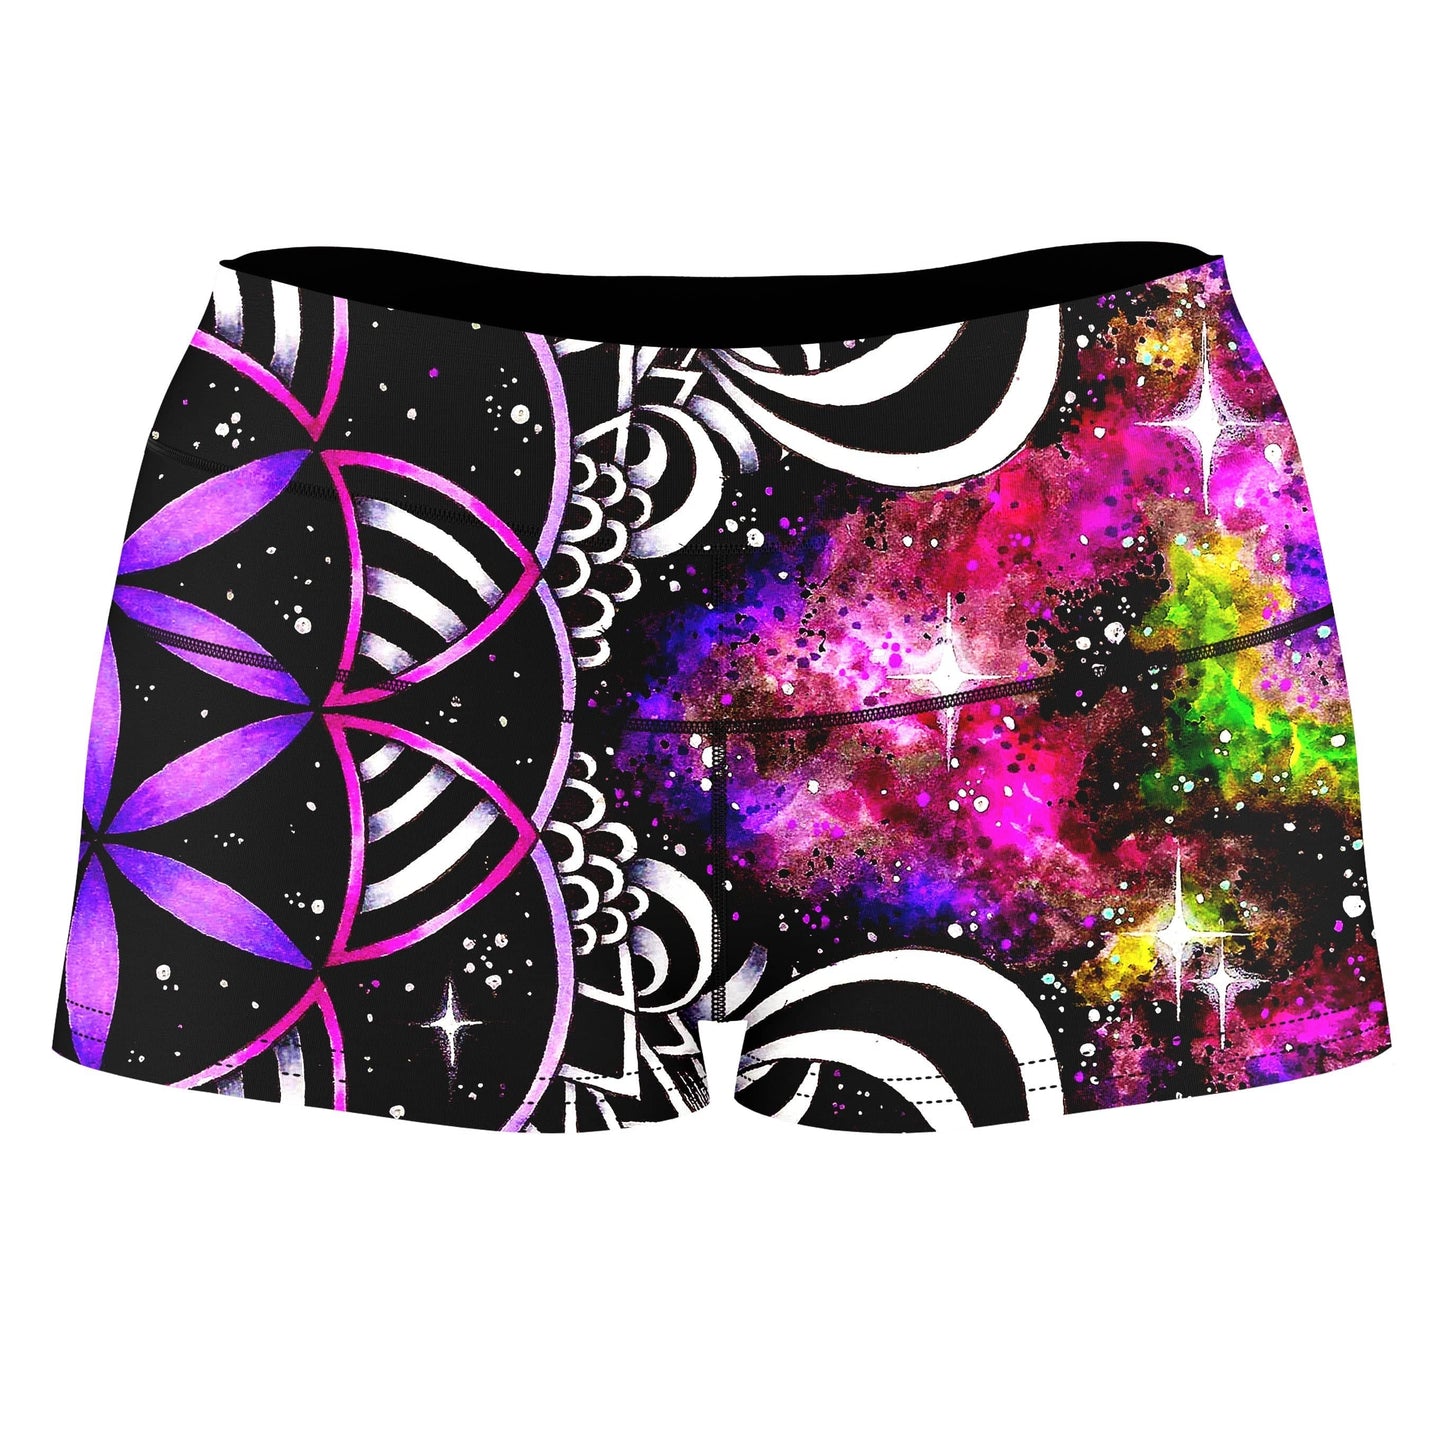 Oracle of Life High-Waisted Women's Shorts, BrizBazaar, | iEDM